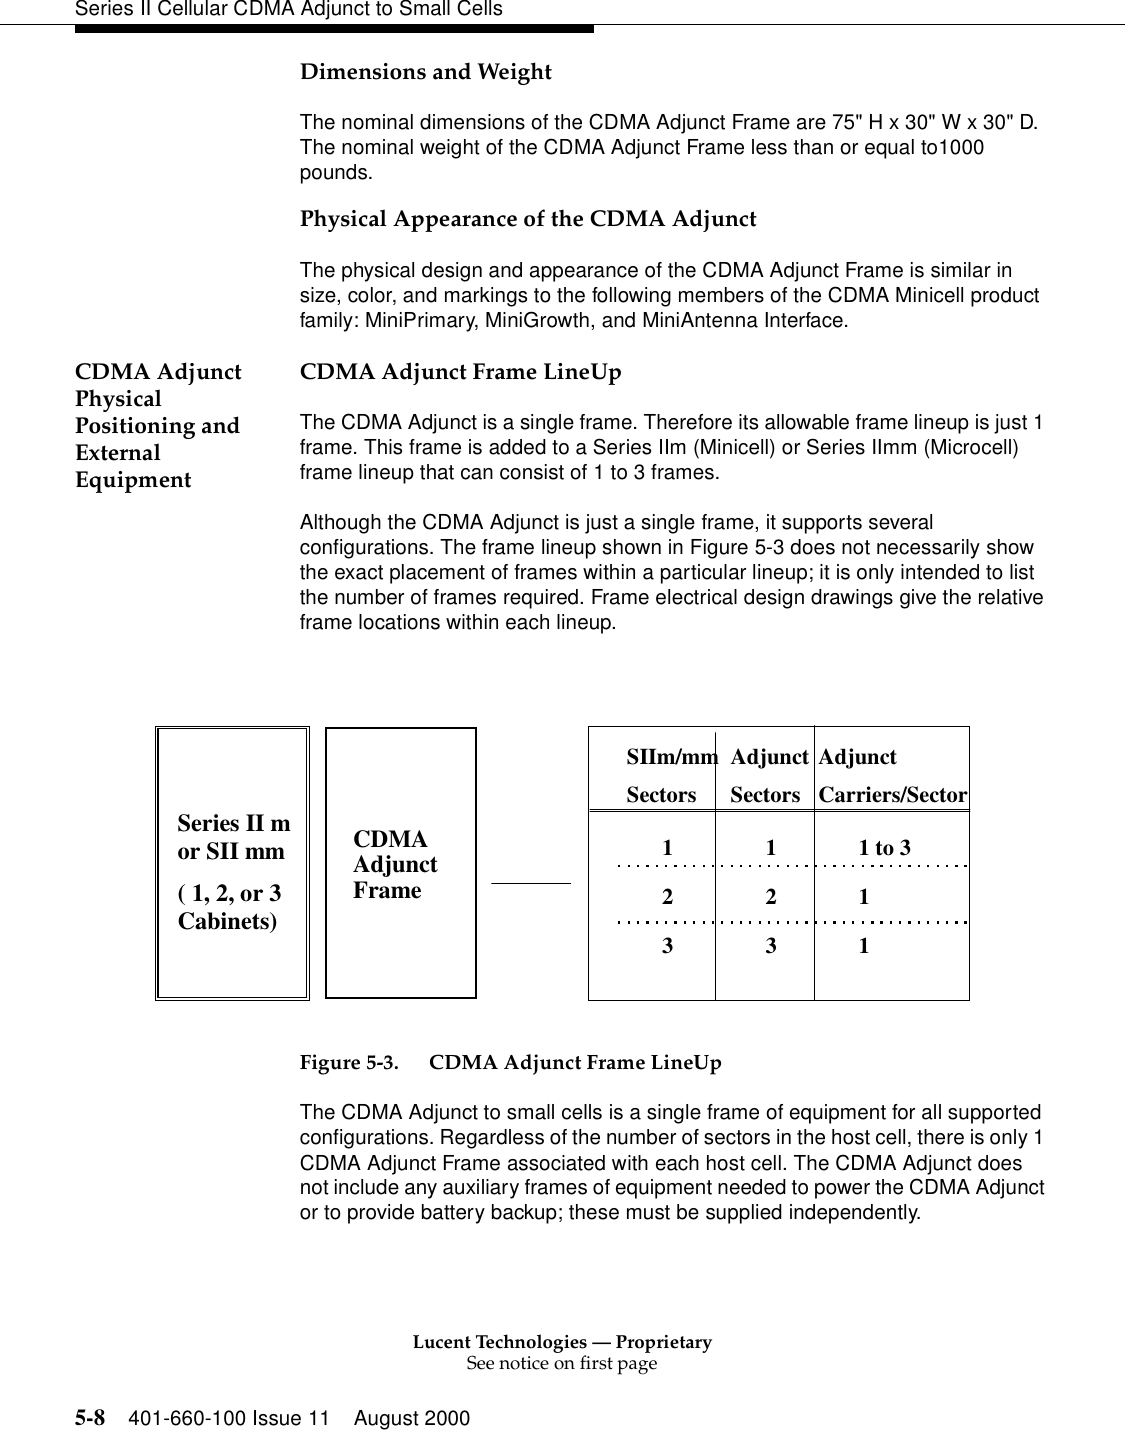 Lucent Technologies — ProprietarySee notice on first page5-8 401-660-100 Issue 11 August 2000Series II Cellular CDMA Adjunct to Small CellsDimensions and WeightThe nominal dimensions of the CDMA Adjunct Frame are 75&quot; H x 30&quot; W x 30&quot; D. The nominal weight of the CDMA Adjunct Frame less than or equal to1000 pounds.Physical Appearance of the CDMA AdjunctThe physical design and appearance of the CDMA Adjunct Frame is similar in size, color, and markings to the following members of the CDMA Minicell product family: MiniPrimary, MiniGrowth, and MiniAntenna Interface.CDMA Adjunct Physical Positioning and External EquipmentCDMA Adjunct Frame LineUpThe CDMA Adjunct is a single frame. Therefore its allowable frame lineup is just 1 frame. This frame is added to a Series IIm (Minicell) or Series IImm (Microcell) frame lineup that can consist of 1 to 3 frames. Although the CDMA Adjunct is just a single frame, it supports several configurations. The frame lineup shown in Figure 5-3 does not necessarily show the exact placement of frames within a particular lineup; it is only intended to list the number of frames required. Frame electrical design drawings give the relative frame locations within each lineup.Figure 5-3. CDMA Adjunct Frame LineUpThe CDMA Adjunct to small cells is a single frame of equipment for all supported configurations. Regardless of the number of sectors in the host cell, there is only 1 CDMA Adjunct Frame associated with each host cell. The CDMA Adjunct does not include any auxiliary frames of equipment needed to power the CDMA Adjunct or to provide battery backup; these must be supplied independently. Series II mor SII mm( 1, 2, or 3Cabinets)CDMAAdjunctFrameSIIm/mmSectorsAdjunctSectorsAdjunctCarriers/Sector1231231 to 311